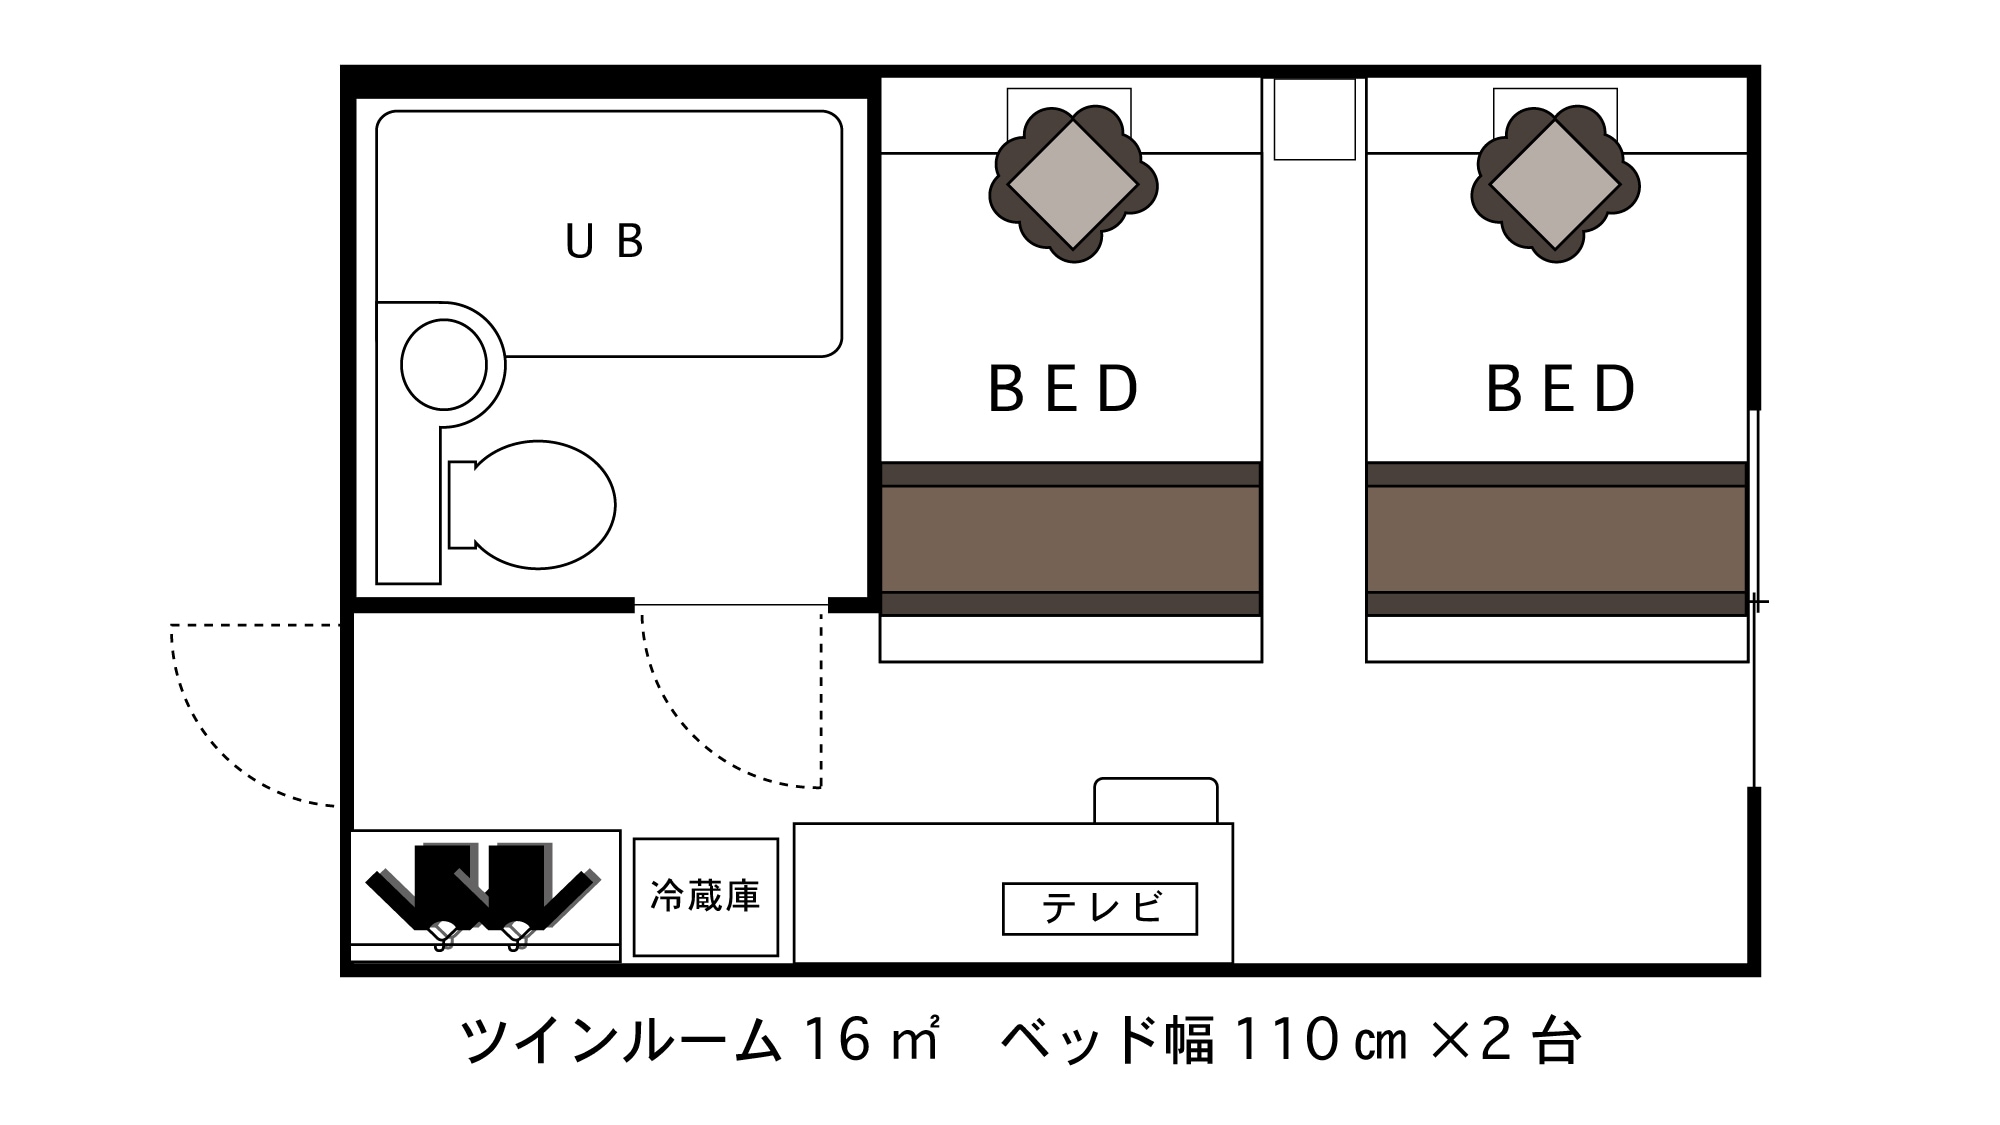 Twin room 16㎡ 110cm bed & times; 2 units